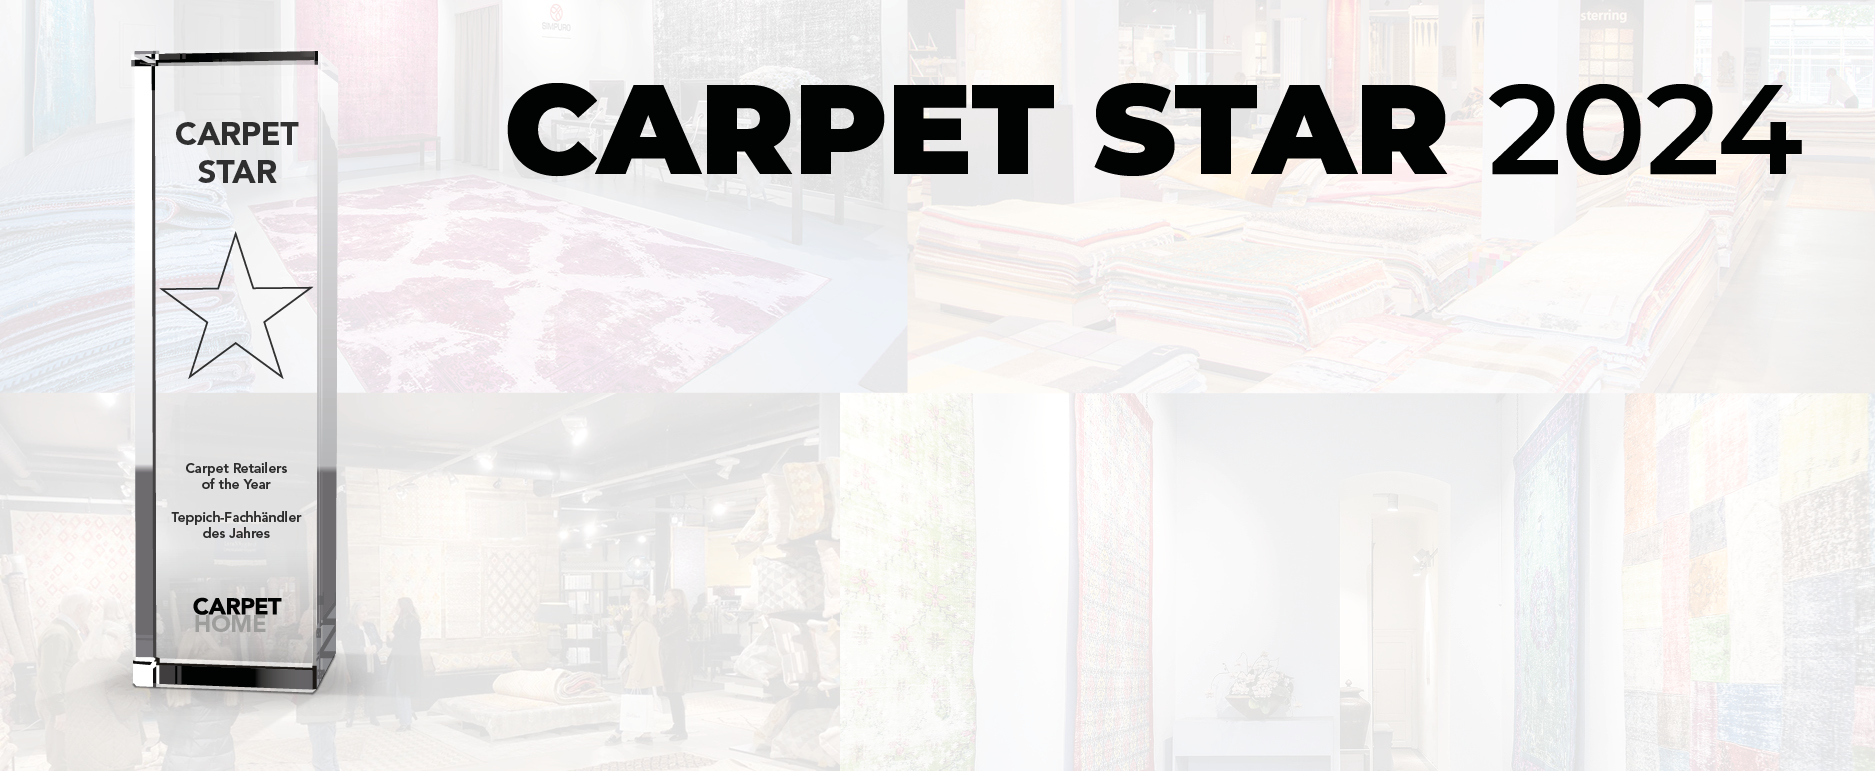 Carpet Star 2024: The carpet retailers of the year